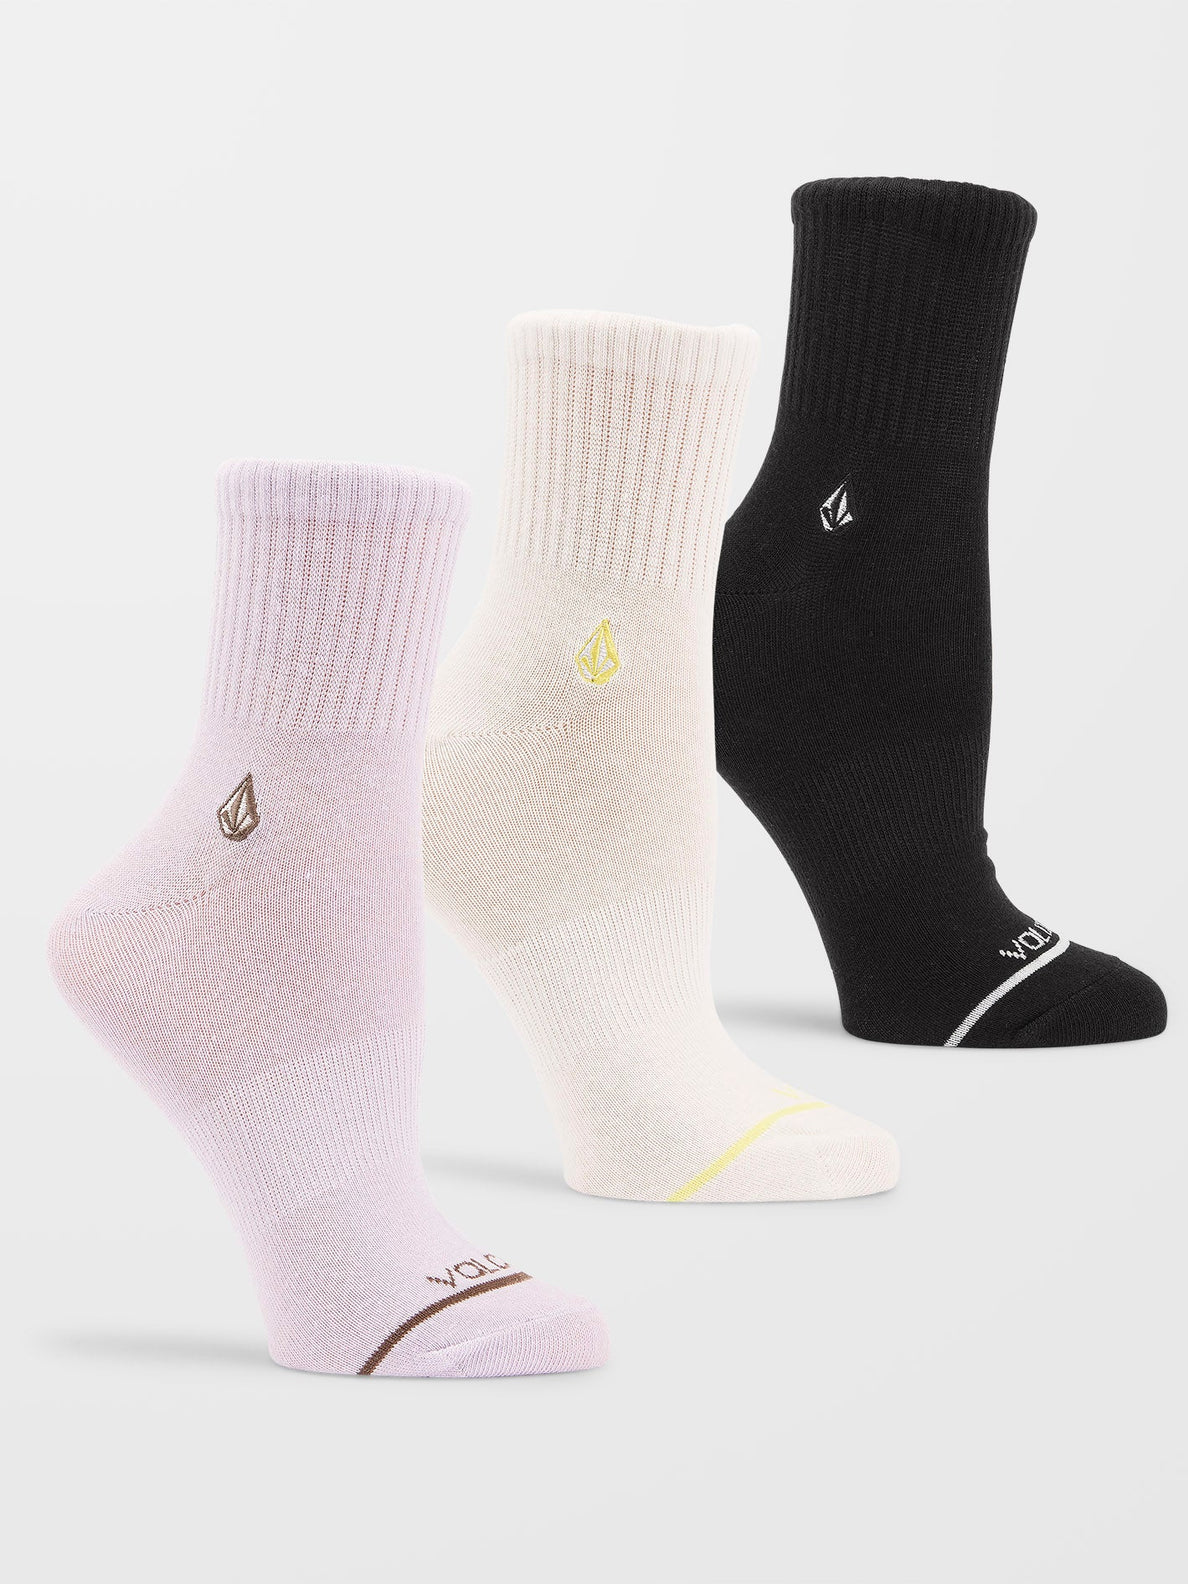 Calcetines The New Crew (paquete de 3) - ASSORTED COLORS